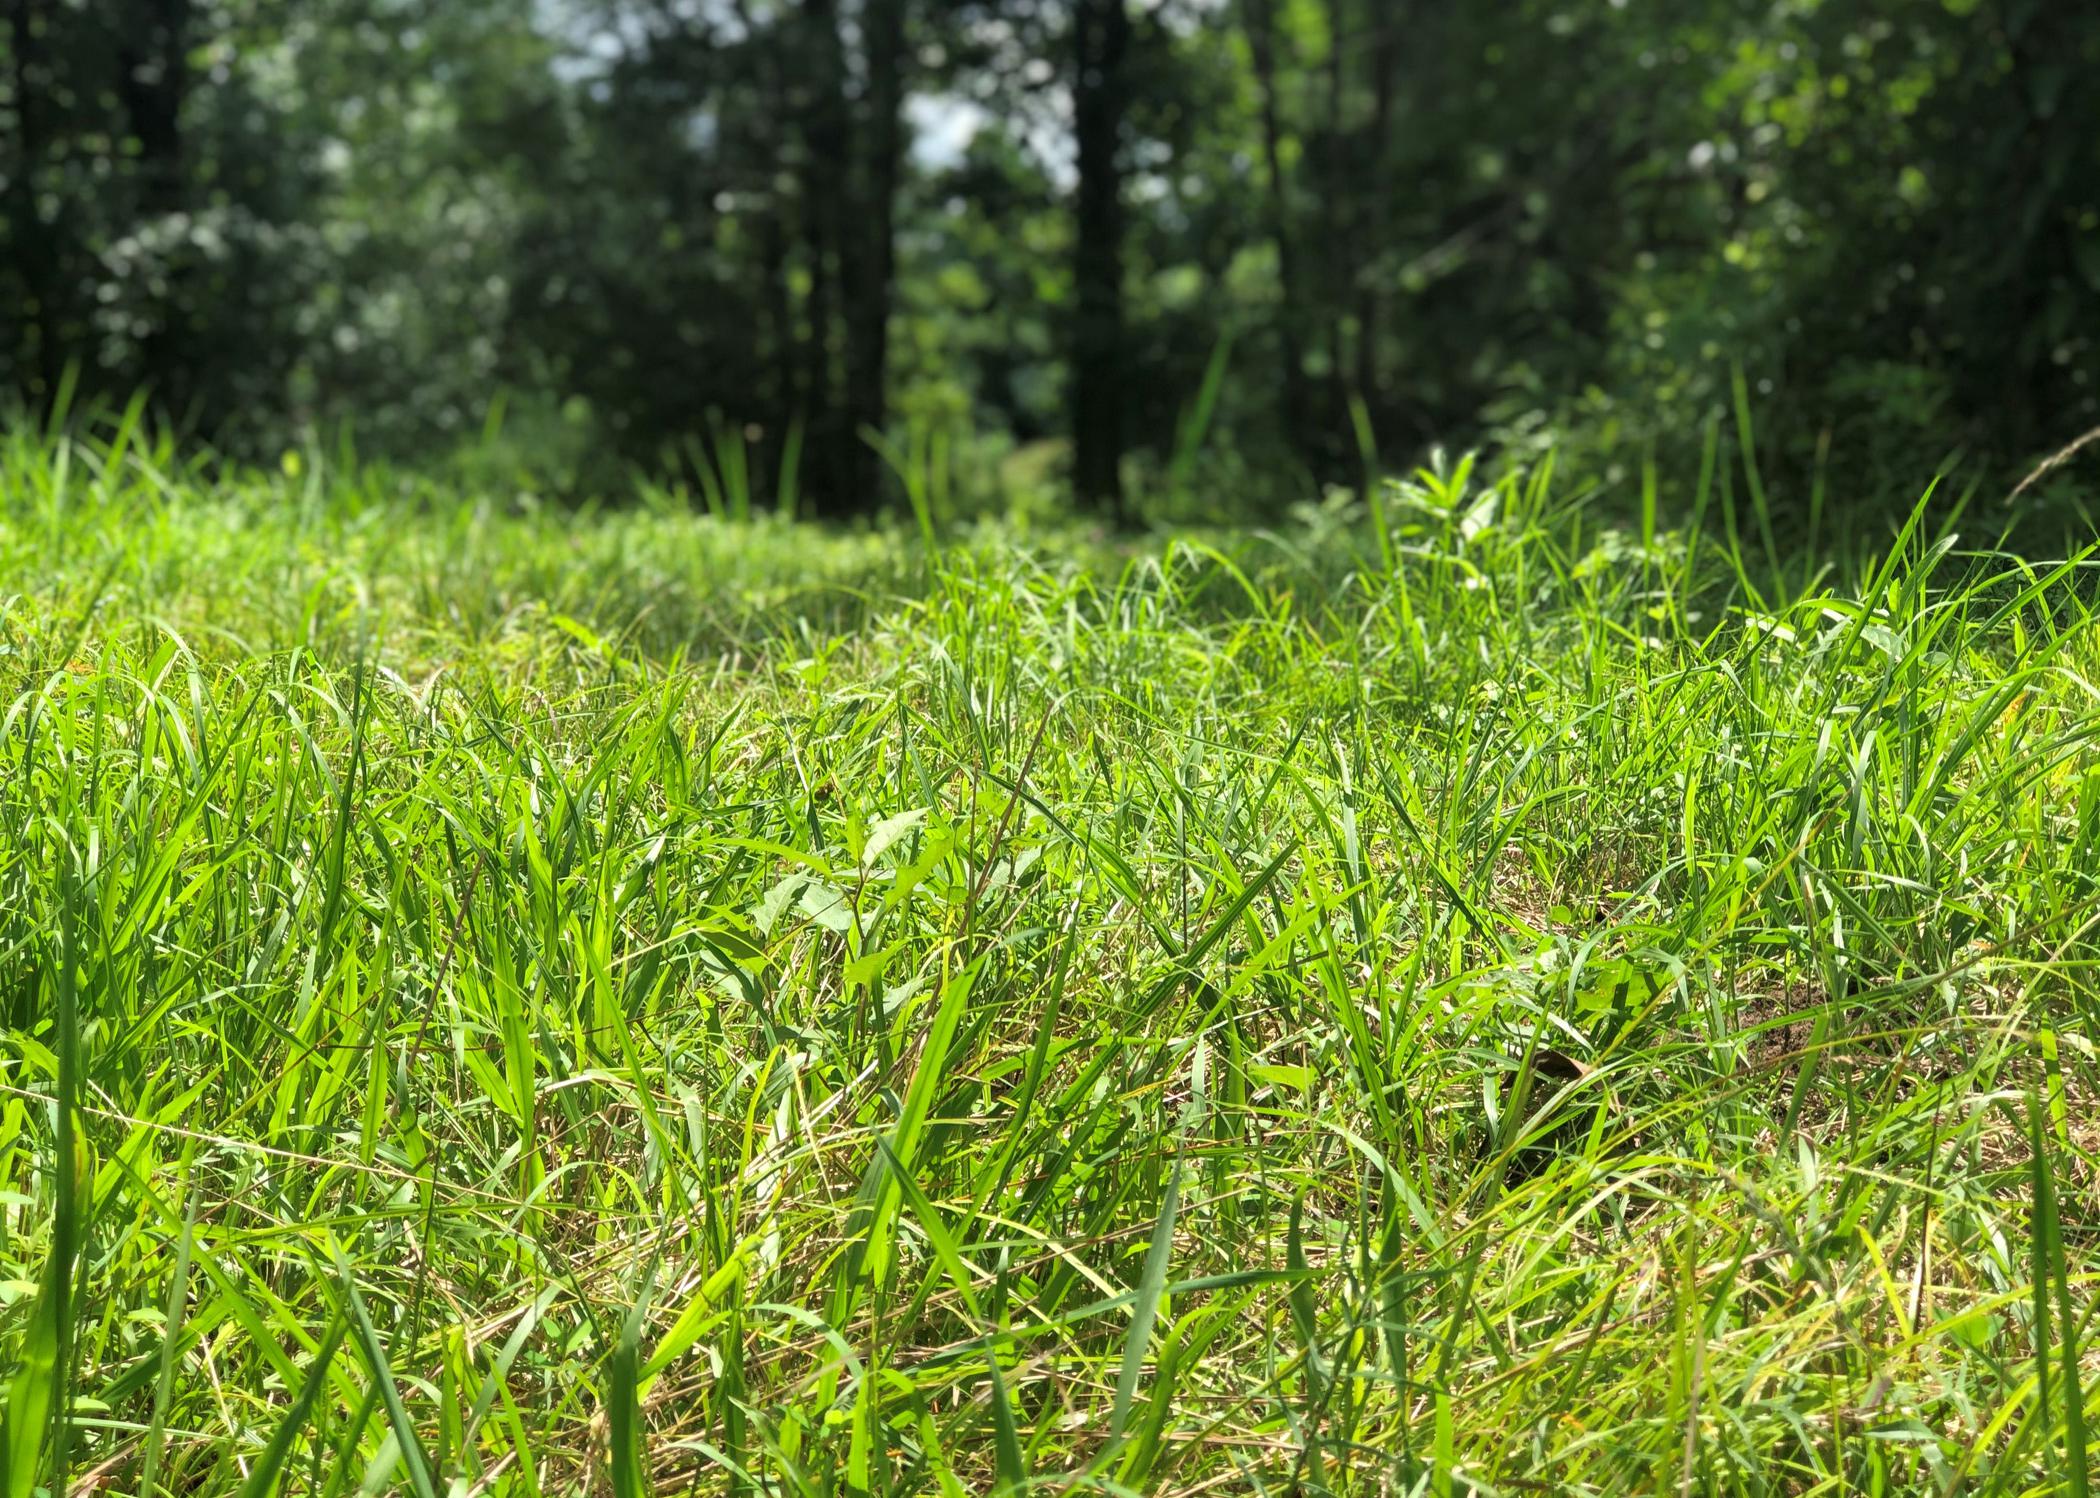 A close-up of tall grass with trees in the background.